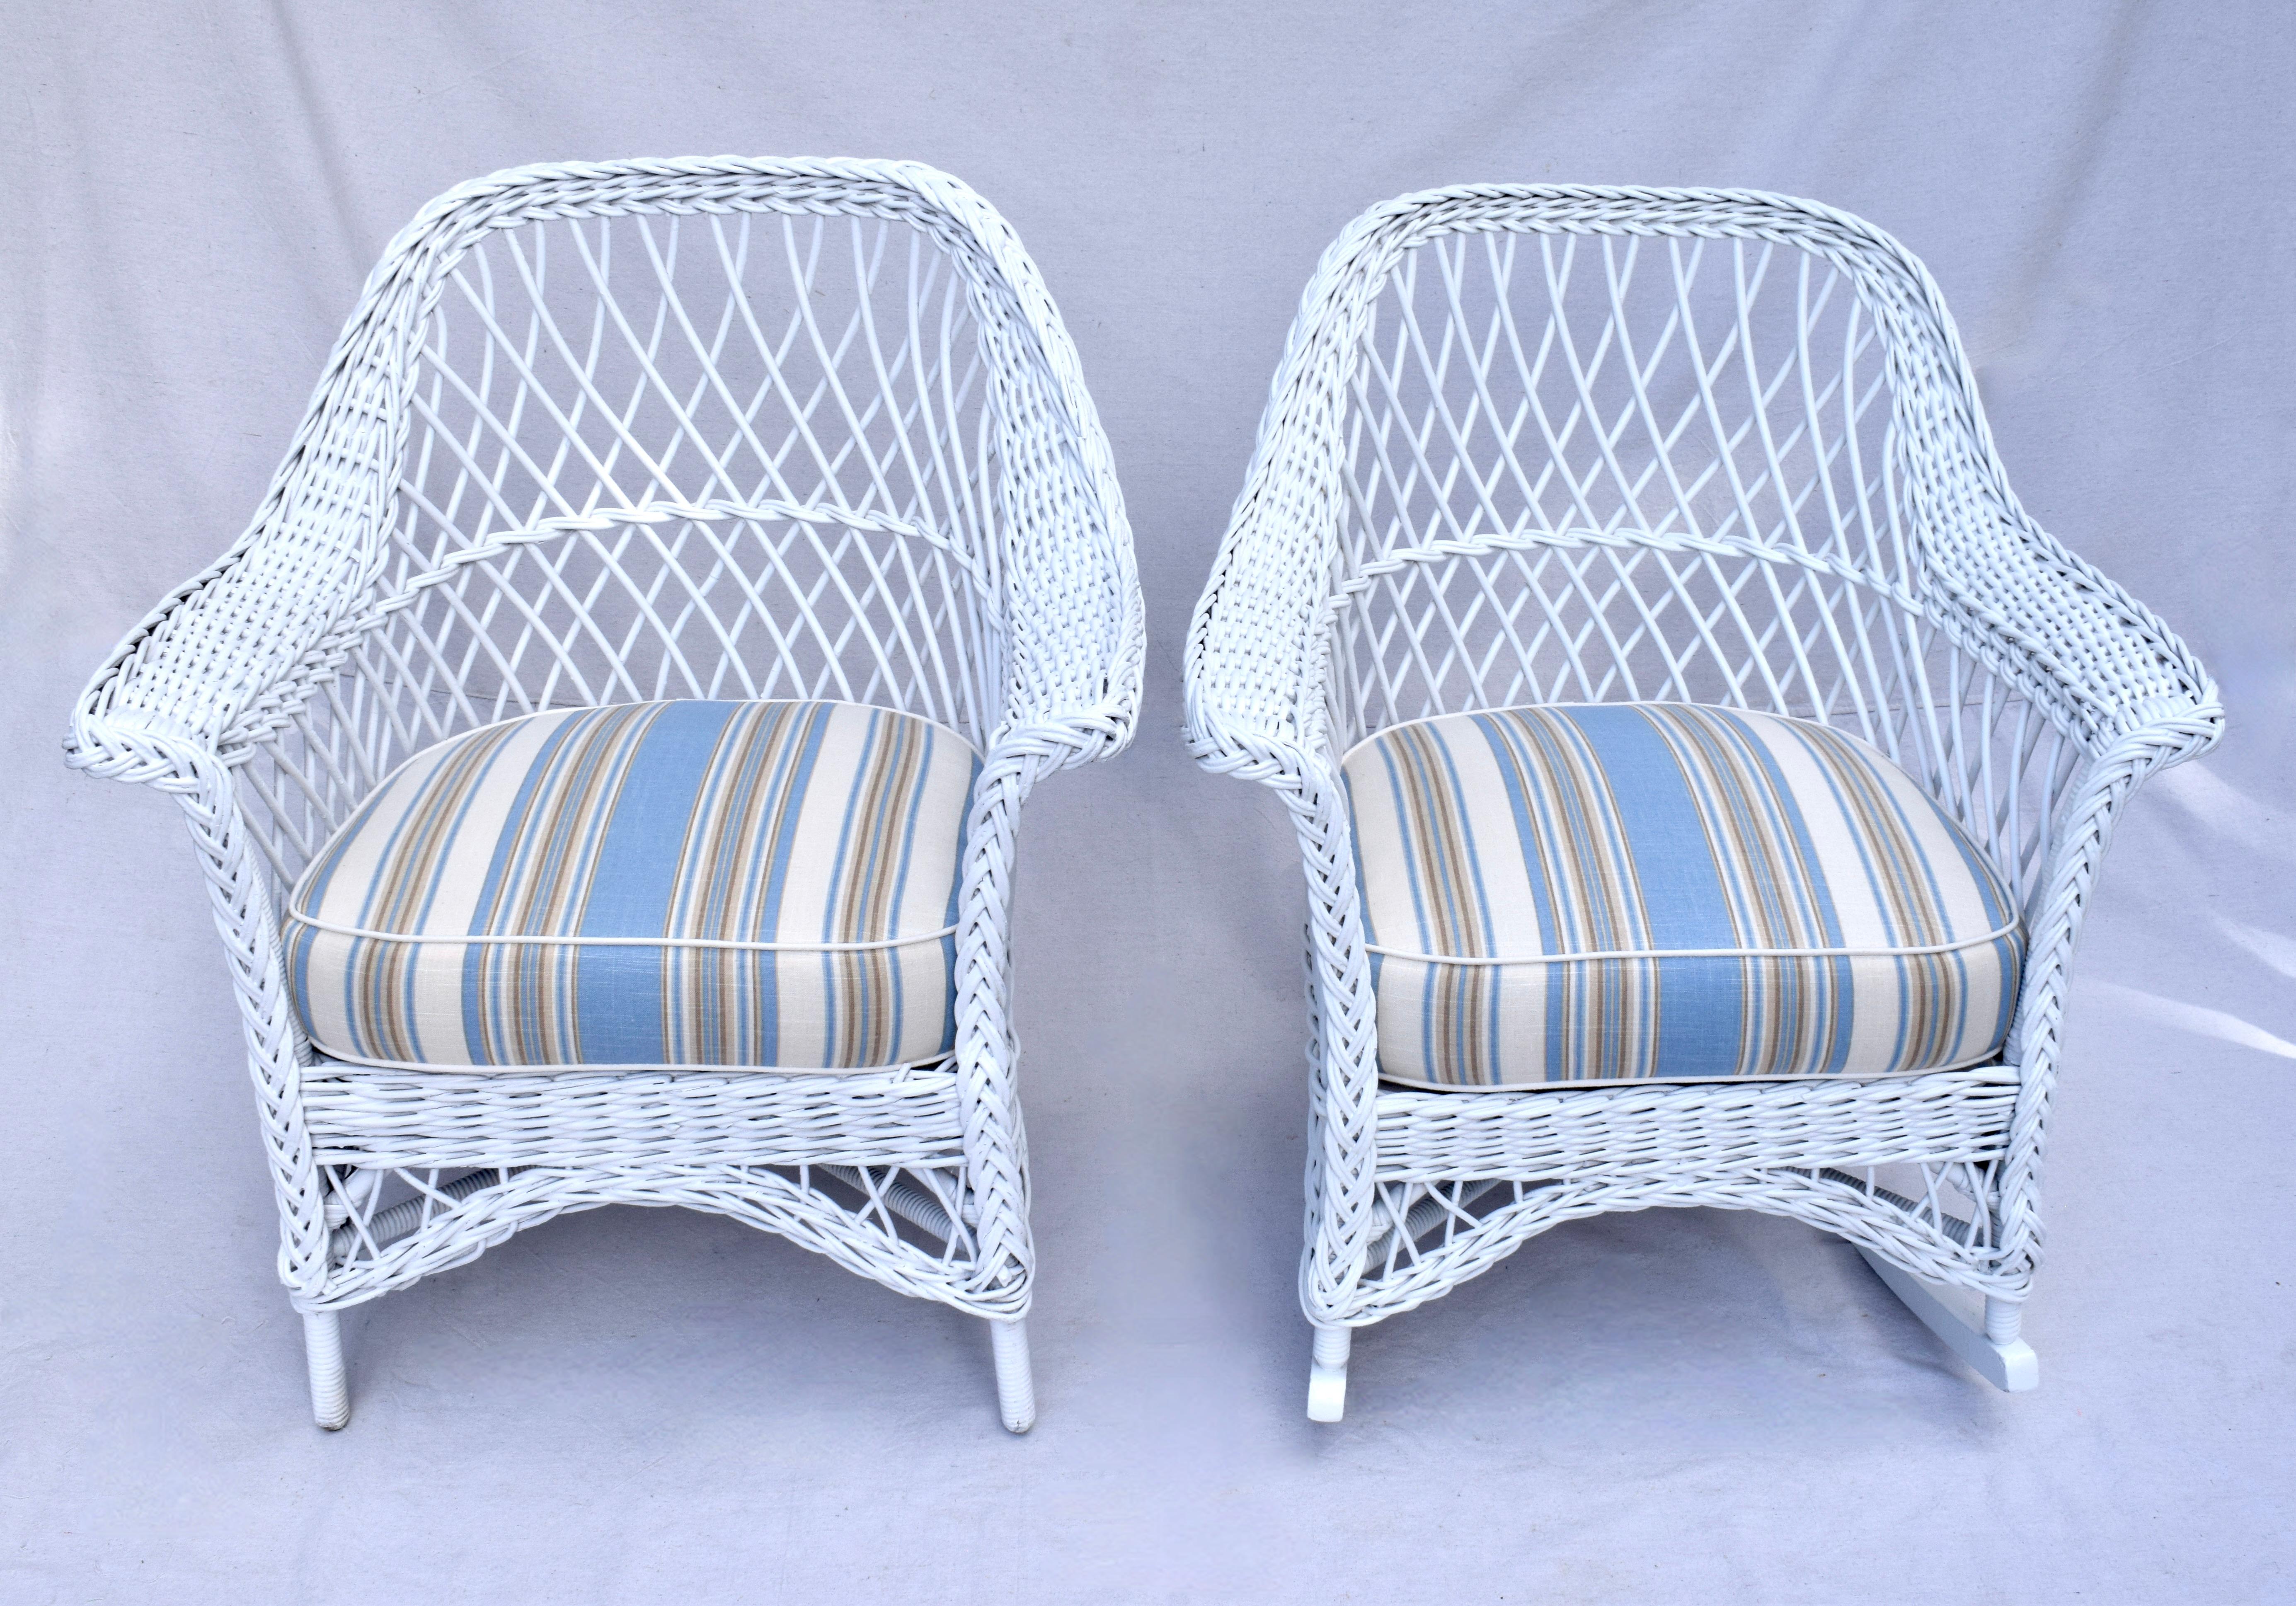 Lacquered Antique Bar Harbor Wicker Chair & Rocker - Set of 2 For Sale